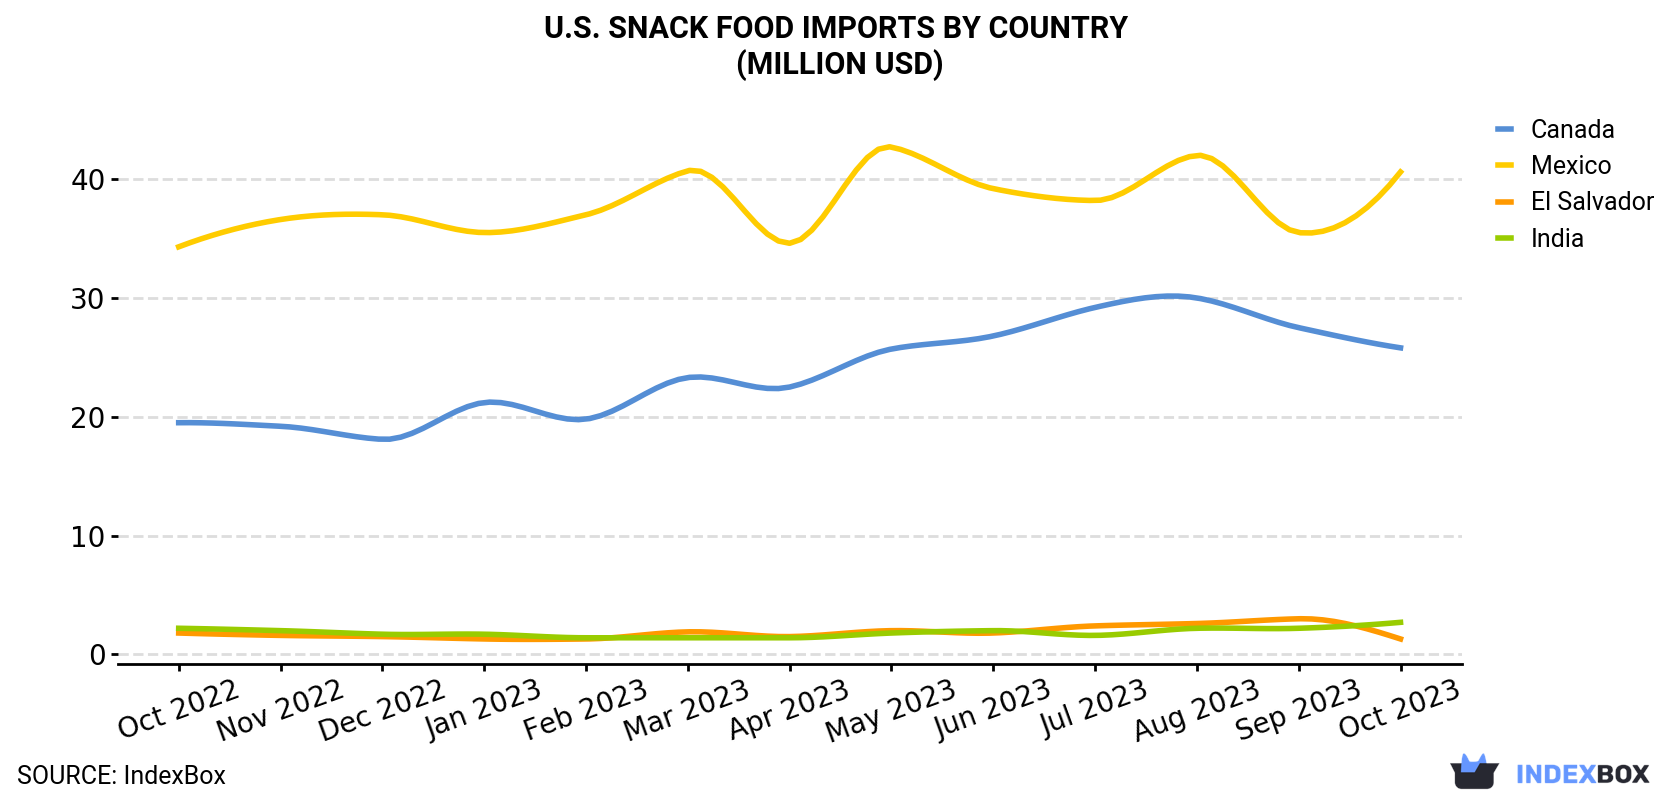 U.S. Snack Food Imports By Country (Million USD)